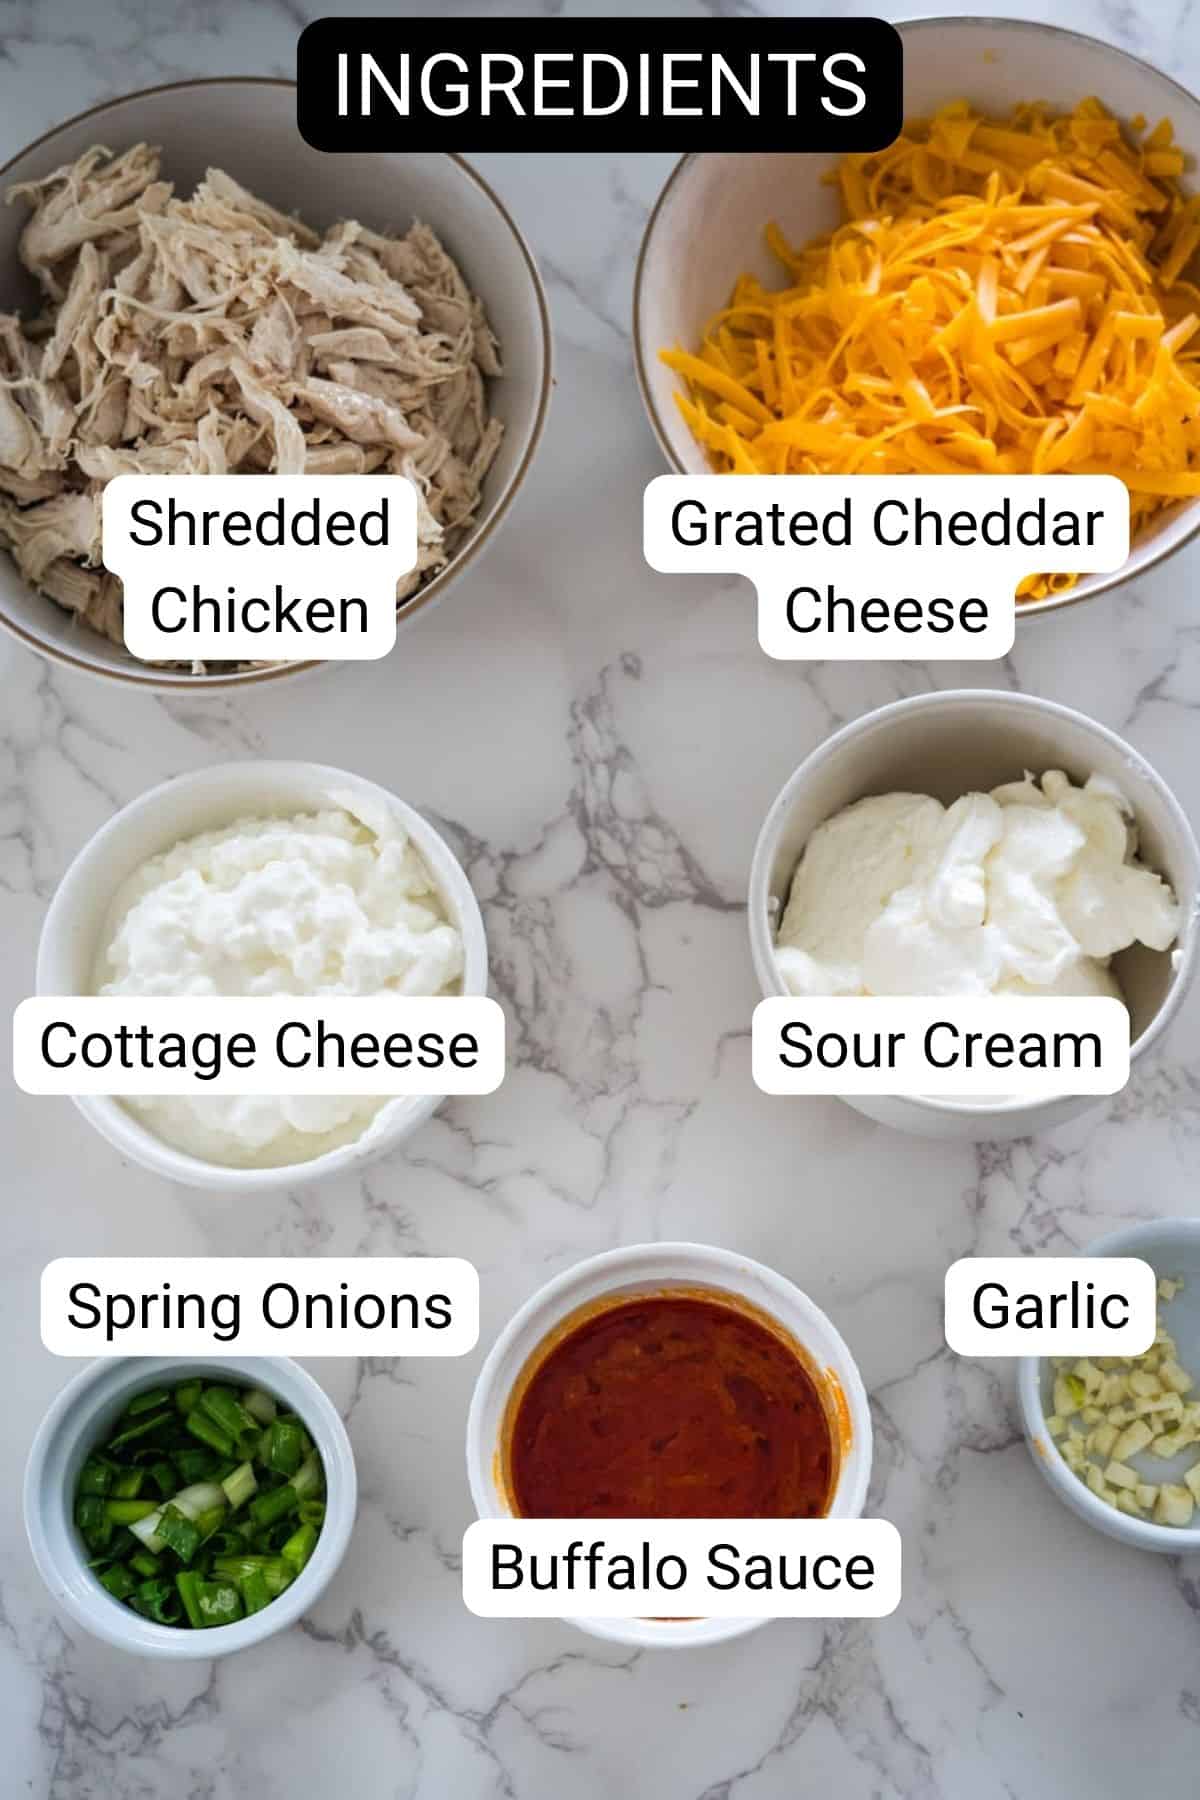 A bowl of ingredients for buffalo chicken dip.